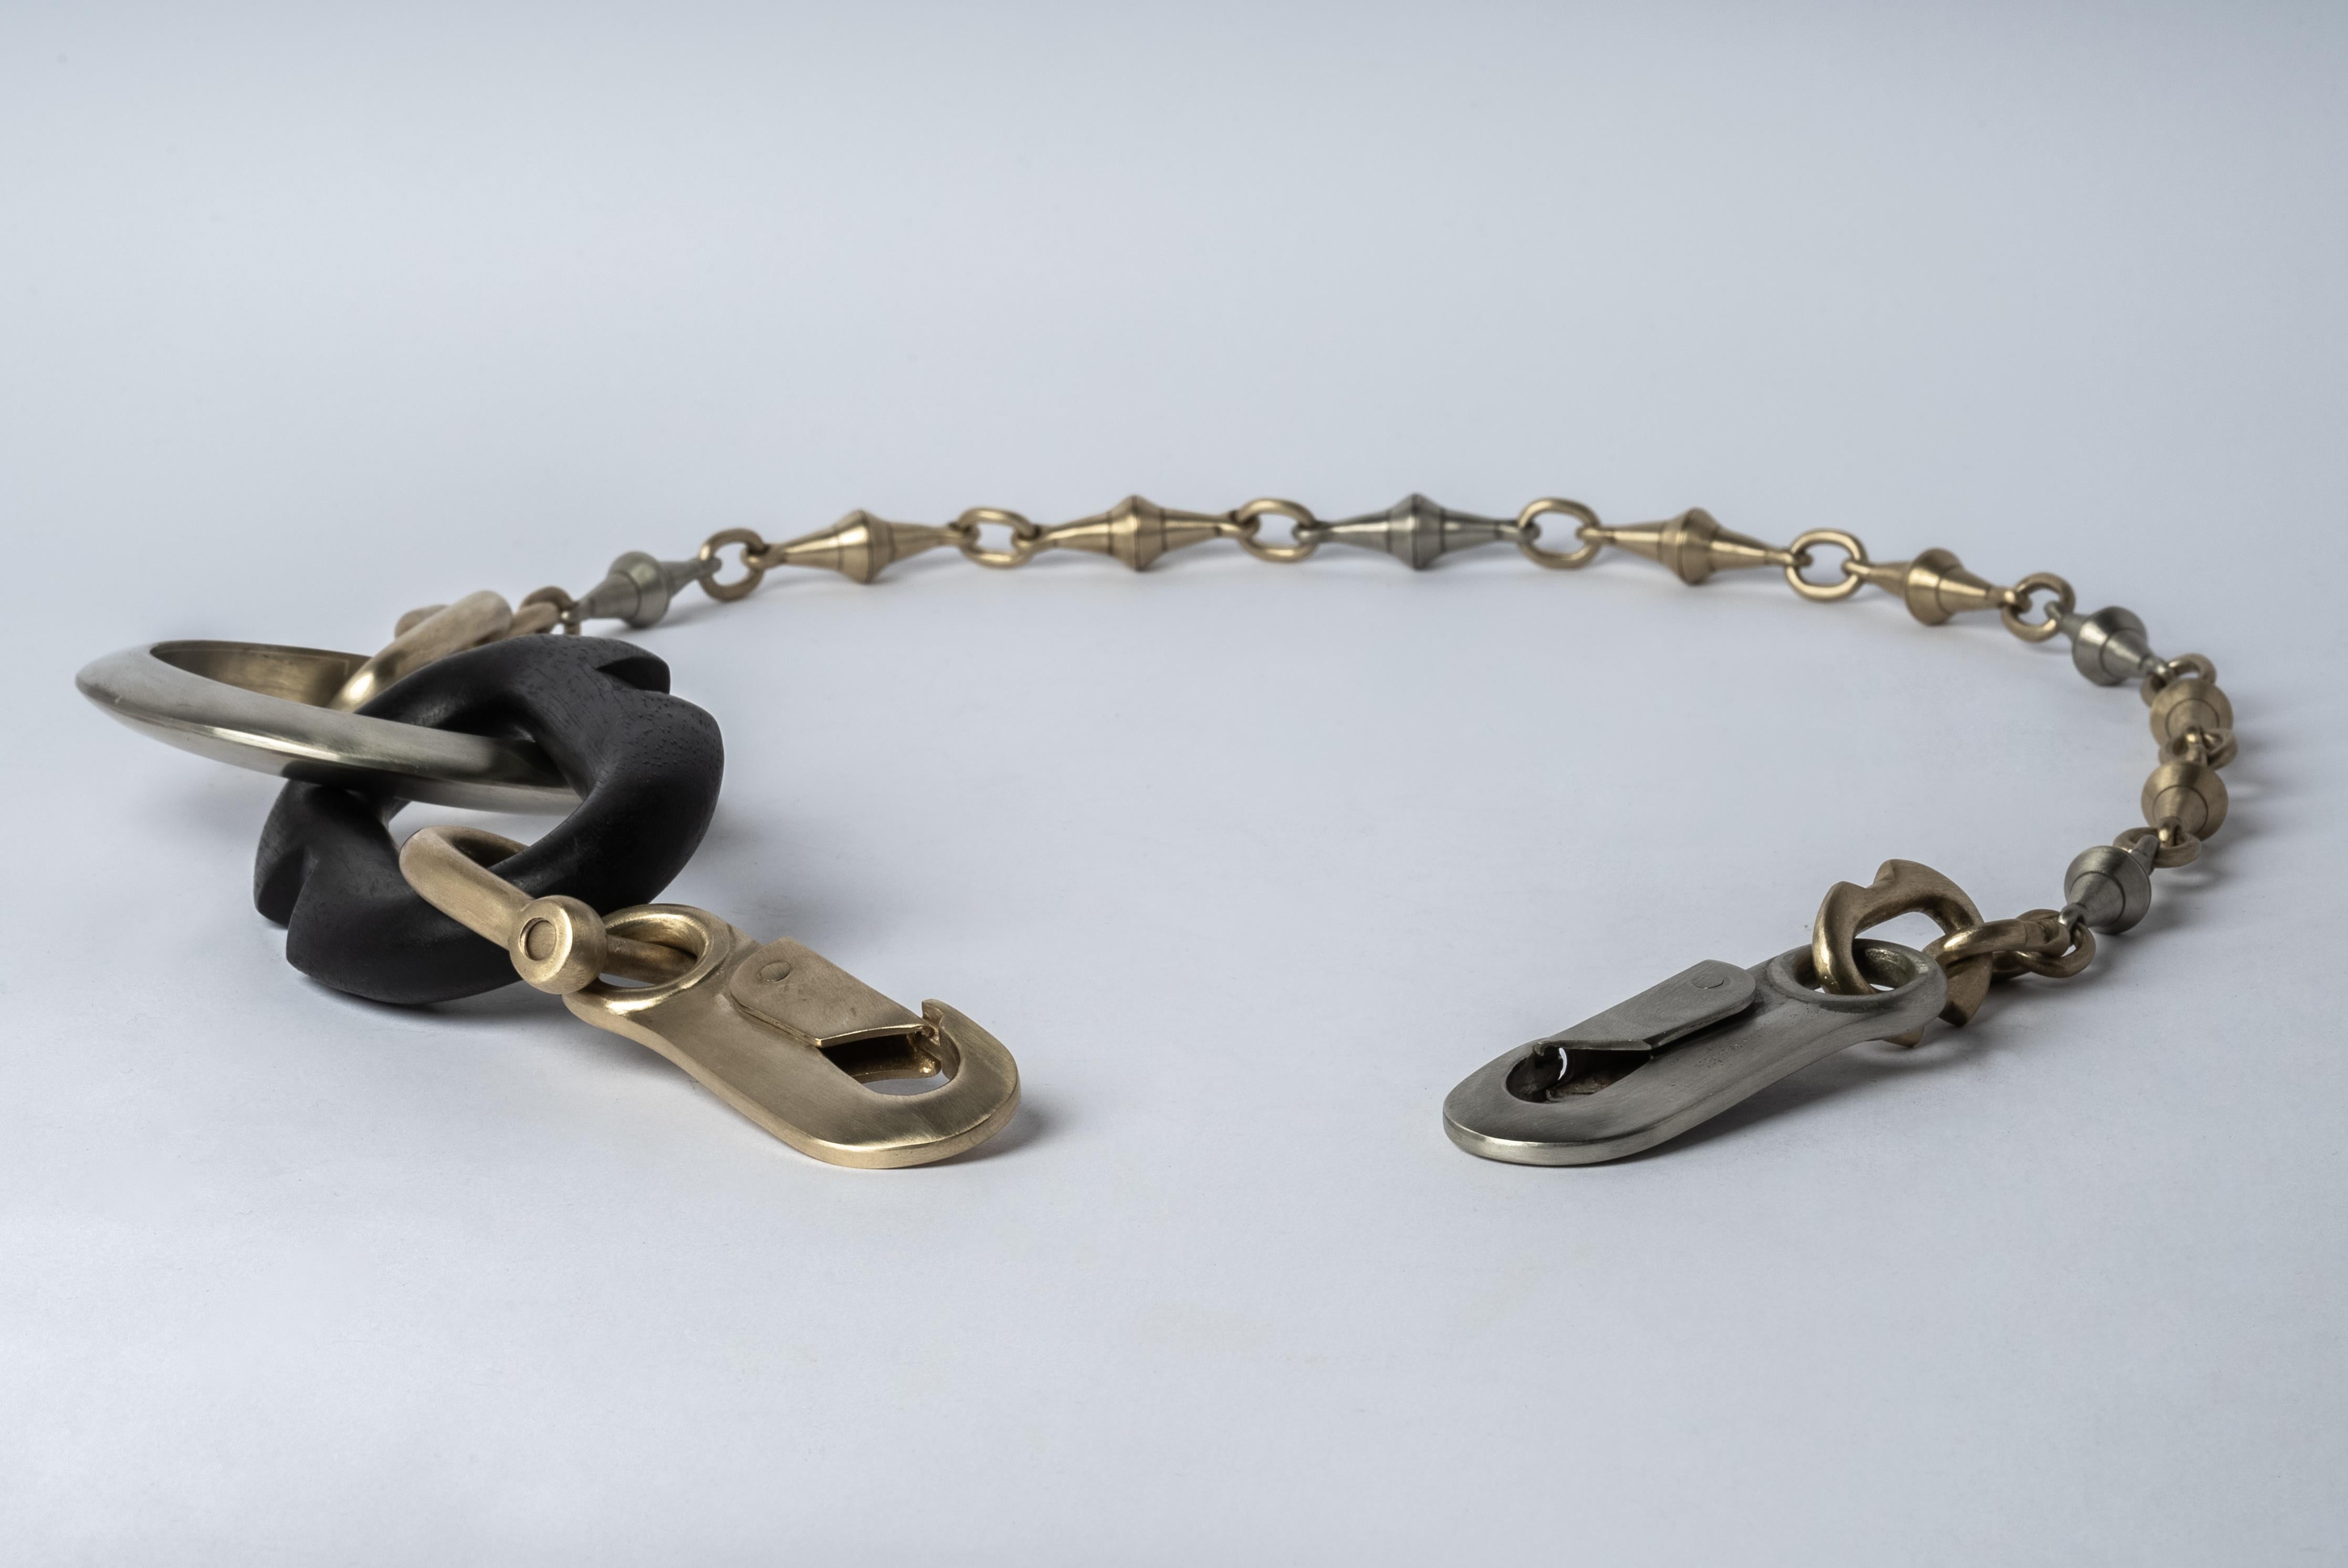 Totemic chain necklace made from combination of wood, brass and bronze.
The Charm System is an interrelated group of products that can be mixed and matched or worn individually.
Chain length (closure to closure): 855 mm